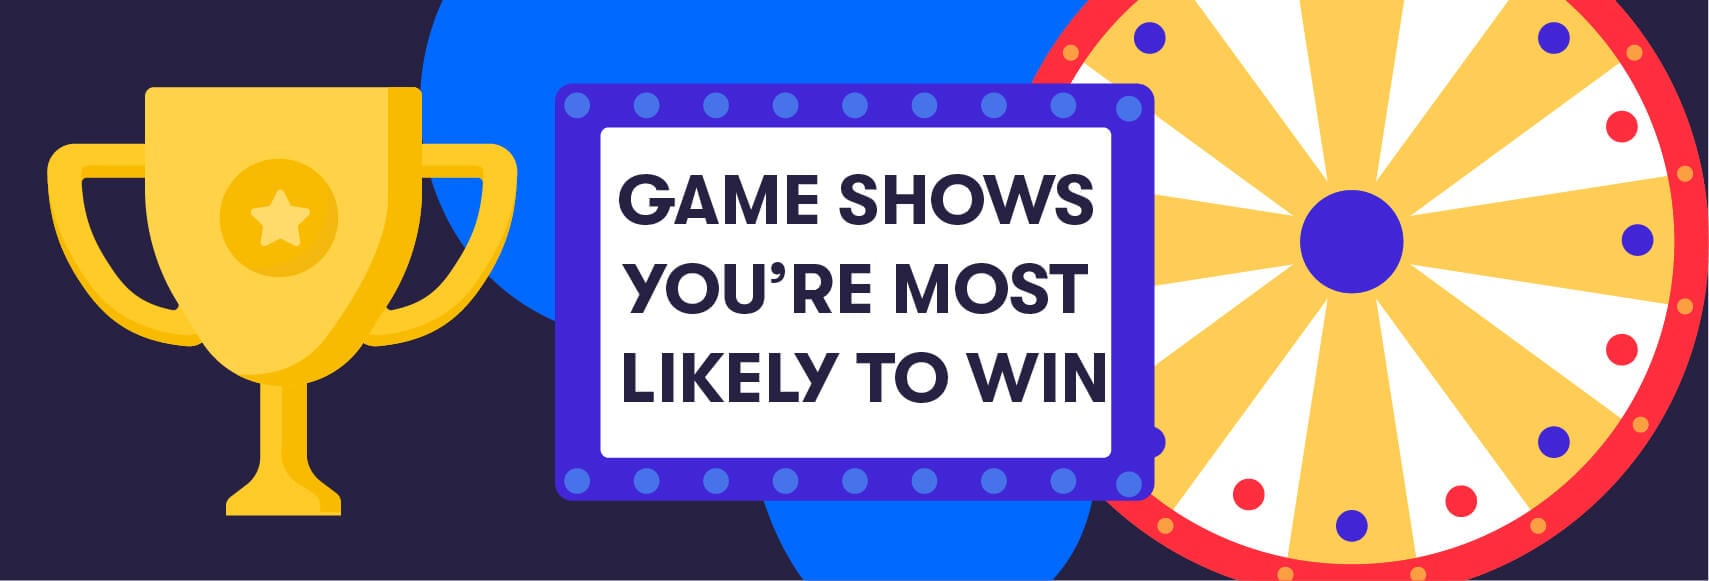 graphic featuring a trophy and game wheel with the text game shows you're most likely to win